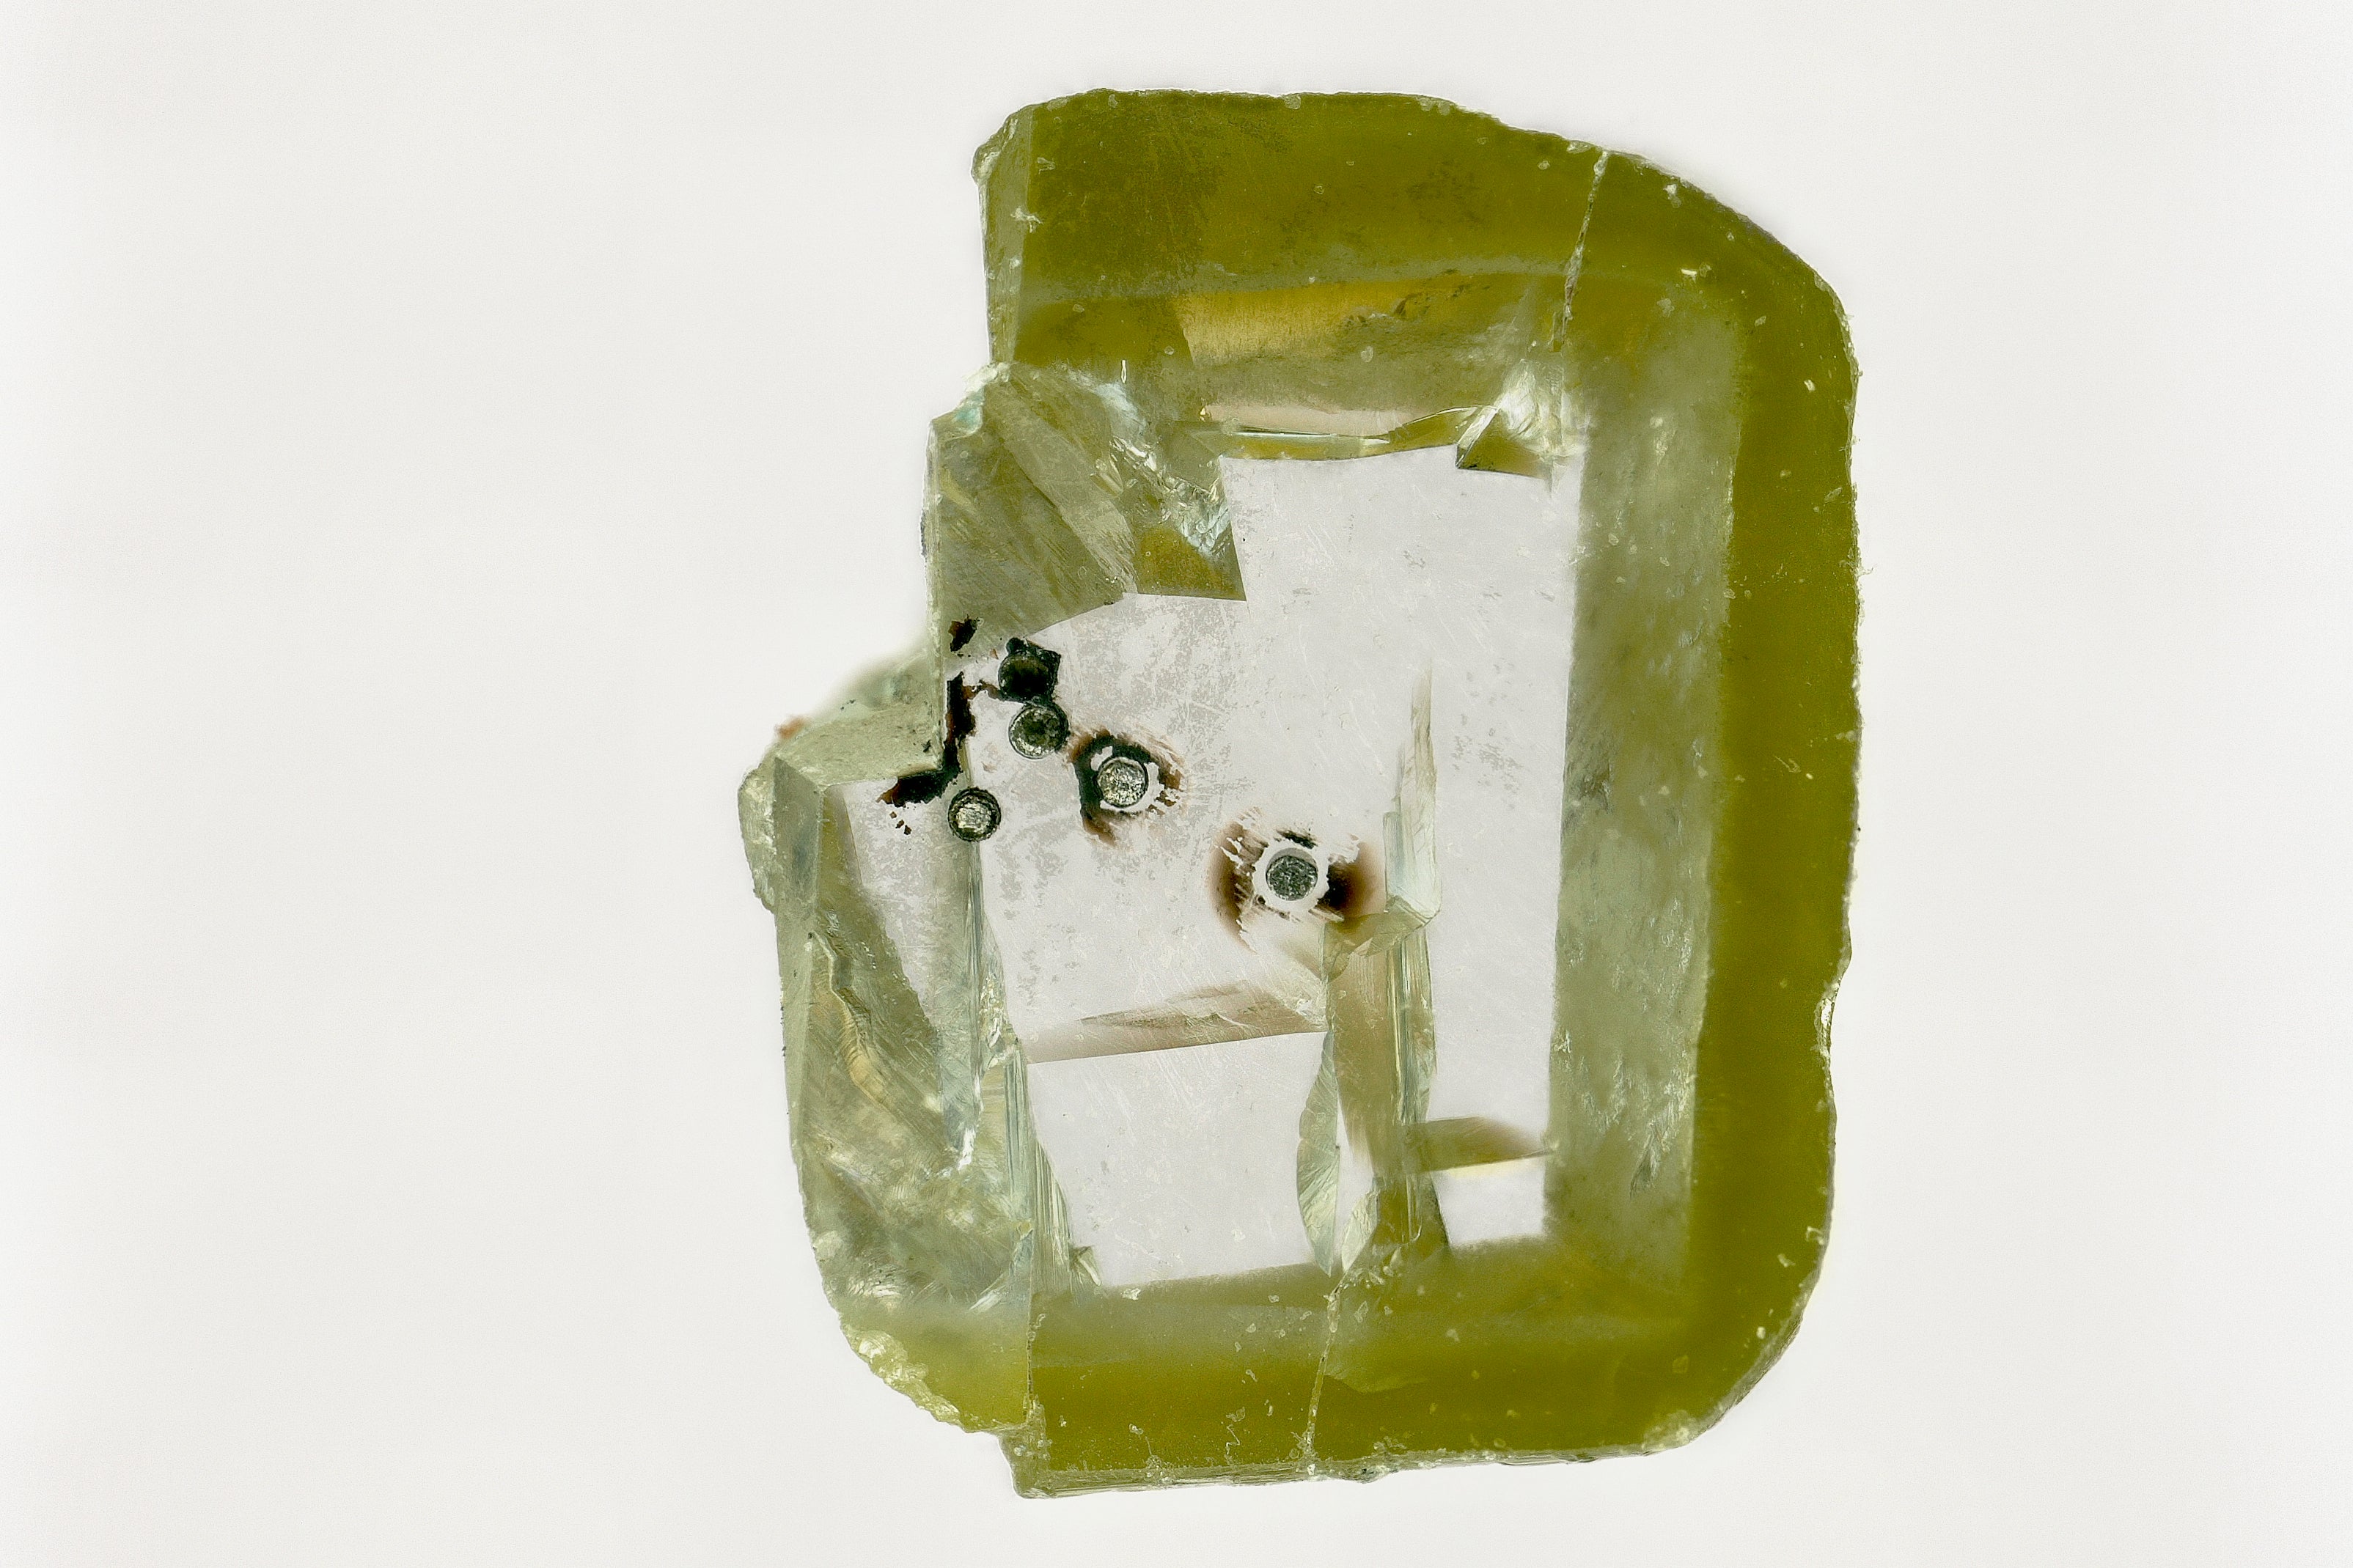 New Mineral Discovered in Deep-Earth Diamond thumbnail